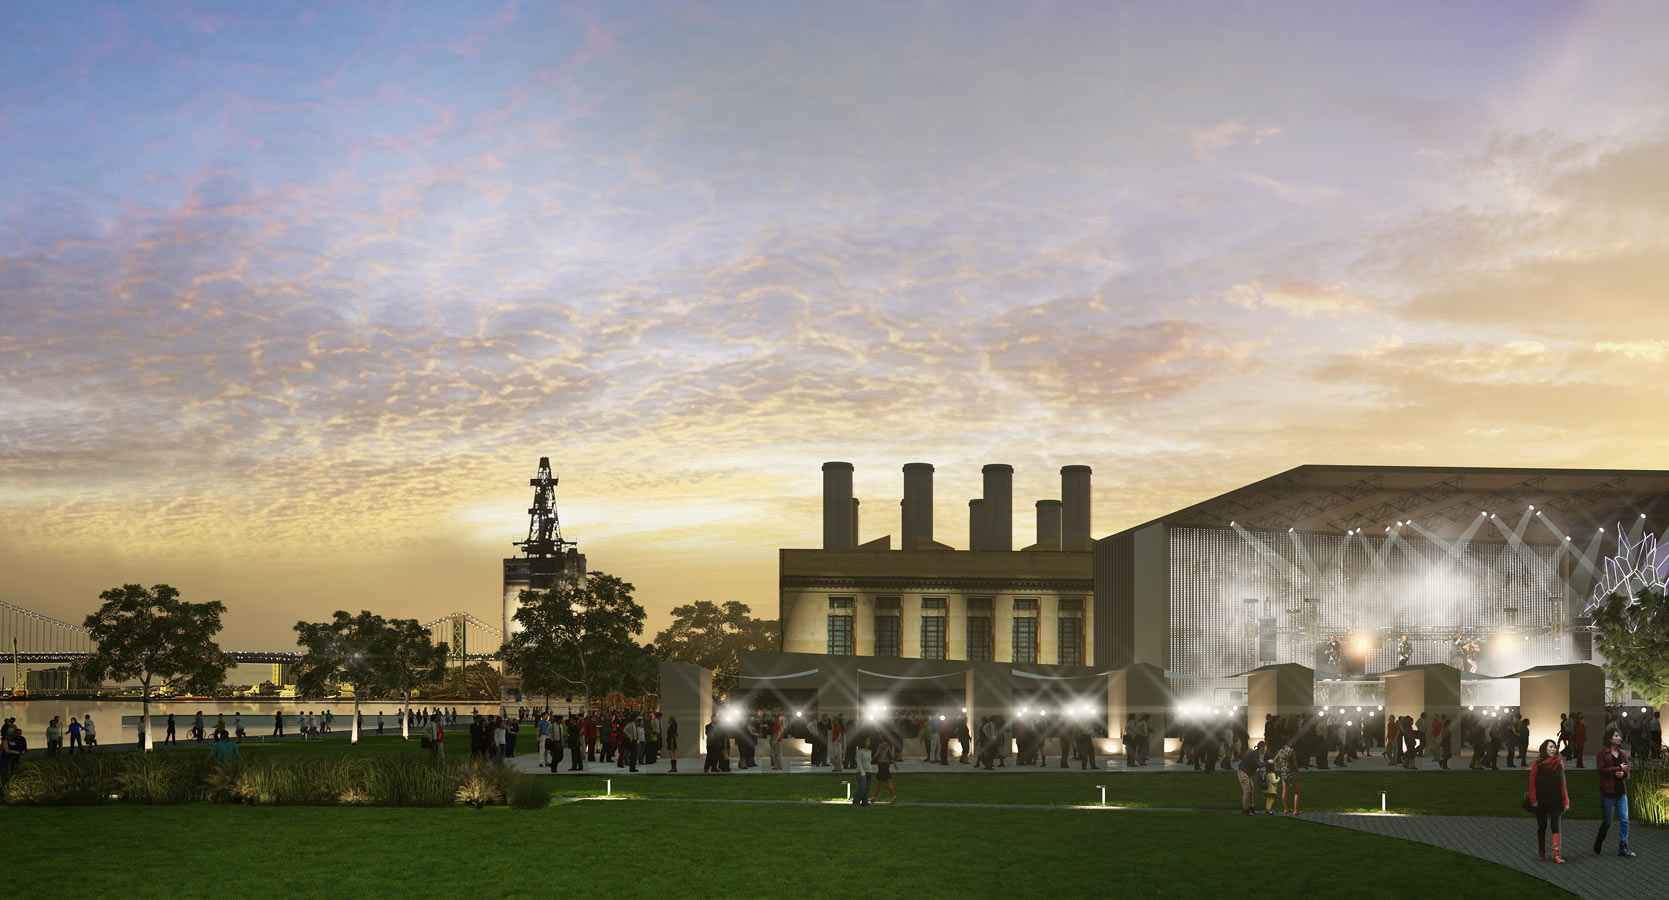 <p>The plan proposes an adaptive reuse of the historic Delaware Generating Station, a power plant next to Penn Treaty District, and envisions redeveloping it for a vibrant mix of cultural, museum, arhicval, office, studio, gallery, retails, and entertainment uses.</p>